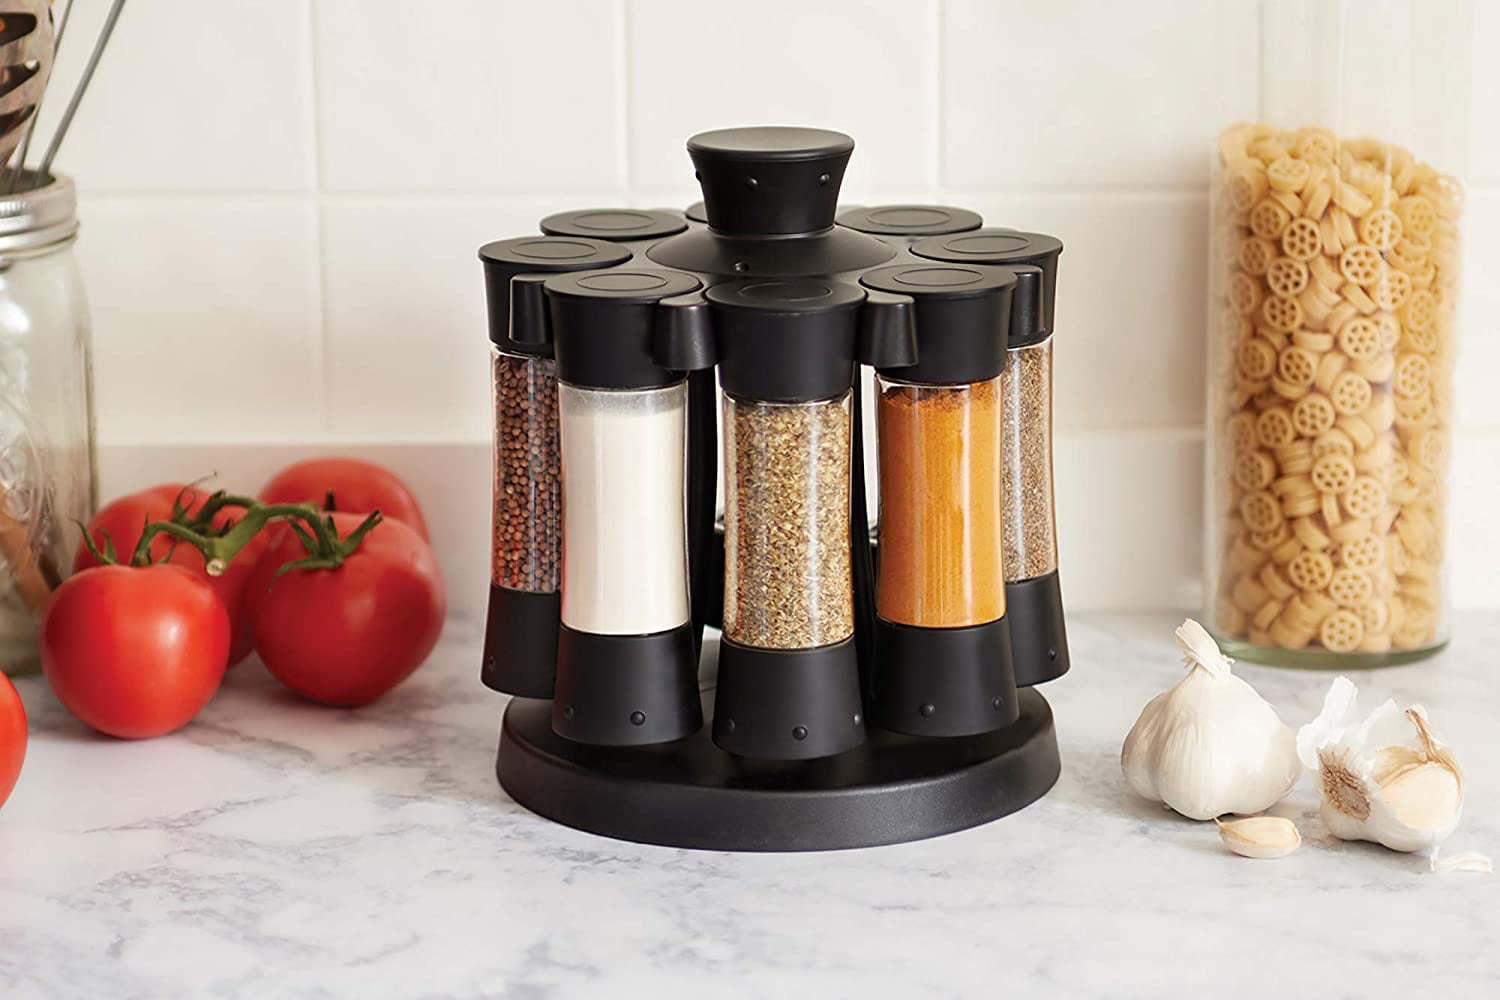 .com: KitchenArt 25000 Auto Measure Spice Carousel without Spices,  White: Spice Racks: Kitchen & Dining